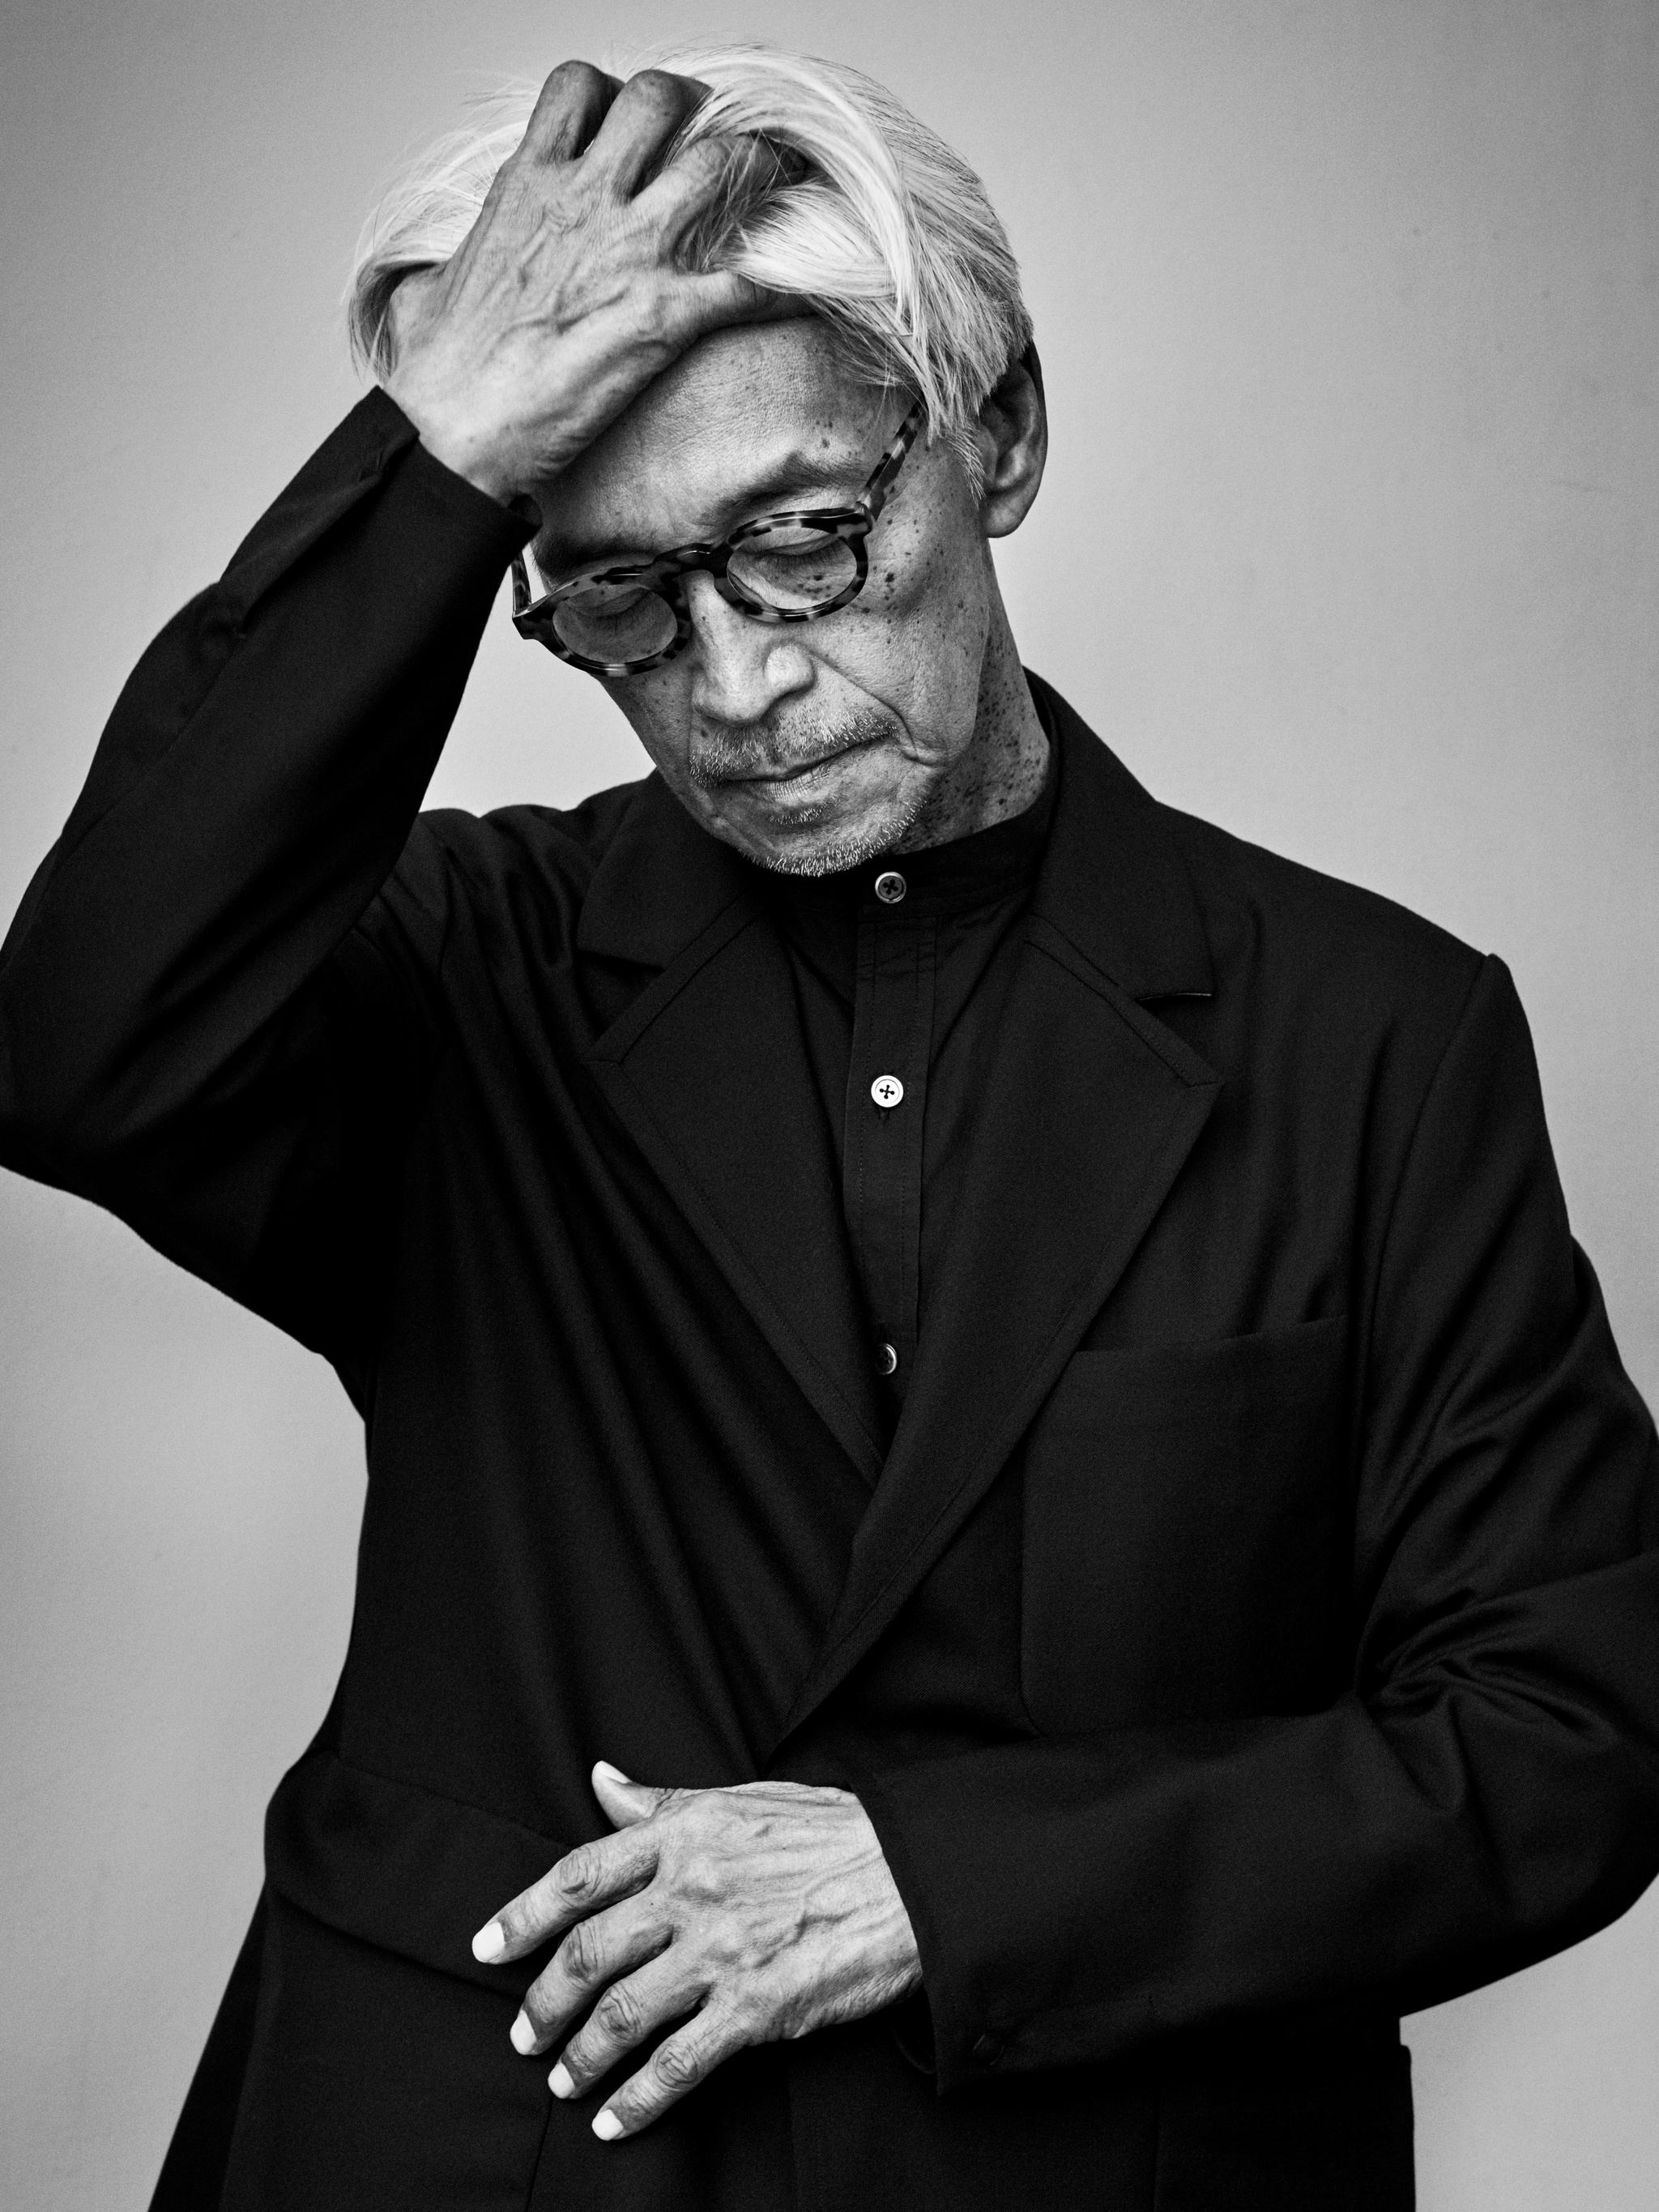 A black and white portrait of an older Japanese man with gray hair. He raises one hand to push his hair back and casts his gaze downward, holding his other hand flat against his waist. He wears dark clothes and glasses. 